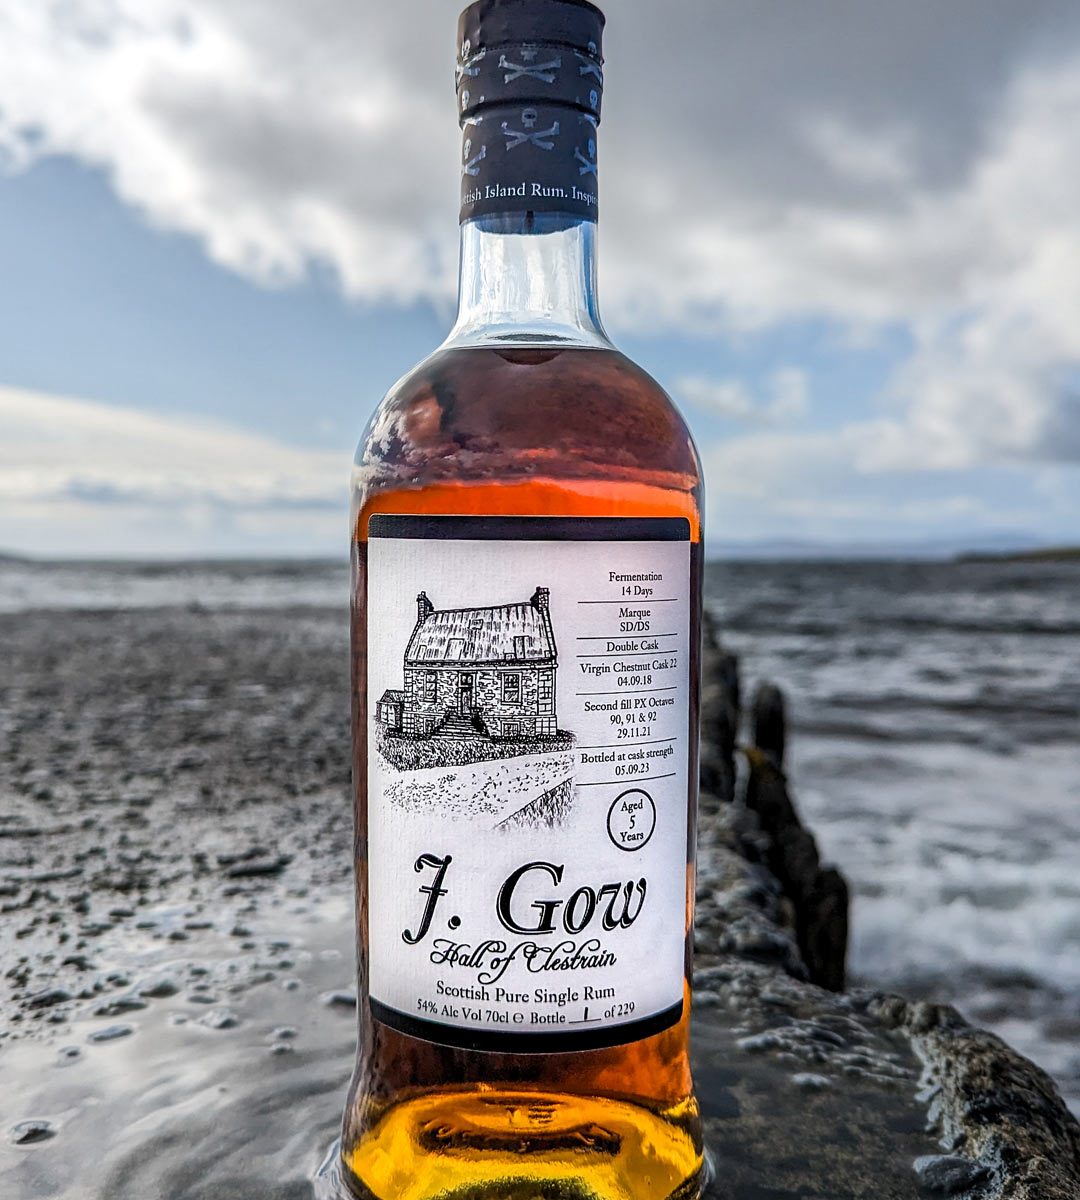 J gow hall of cestrain chestnut px cask aged 5 year old scottish rum